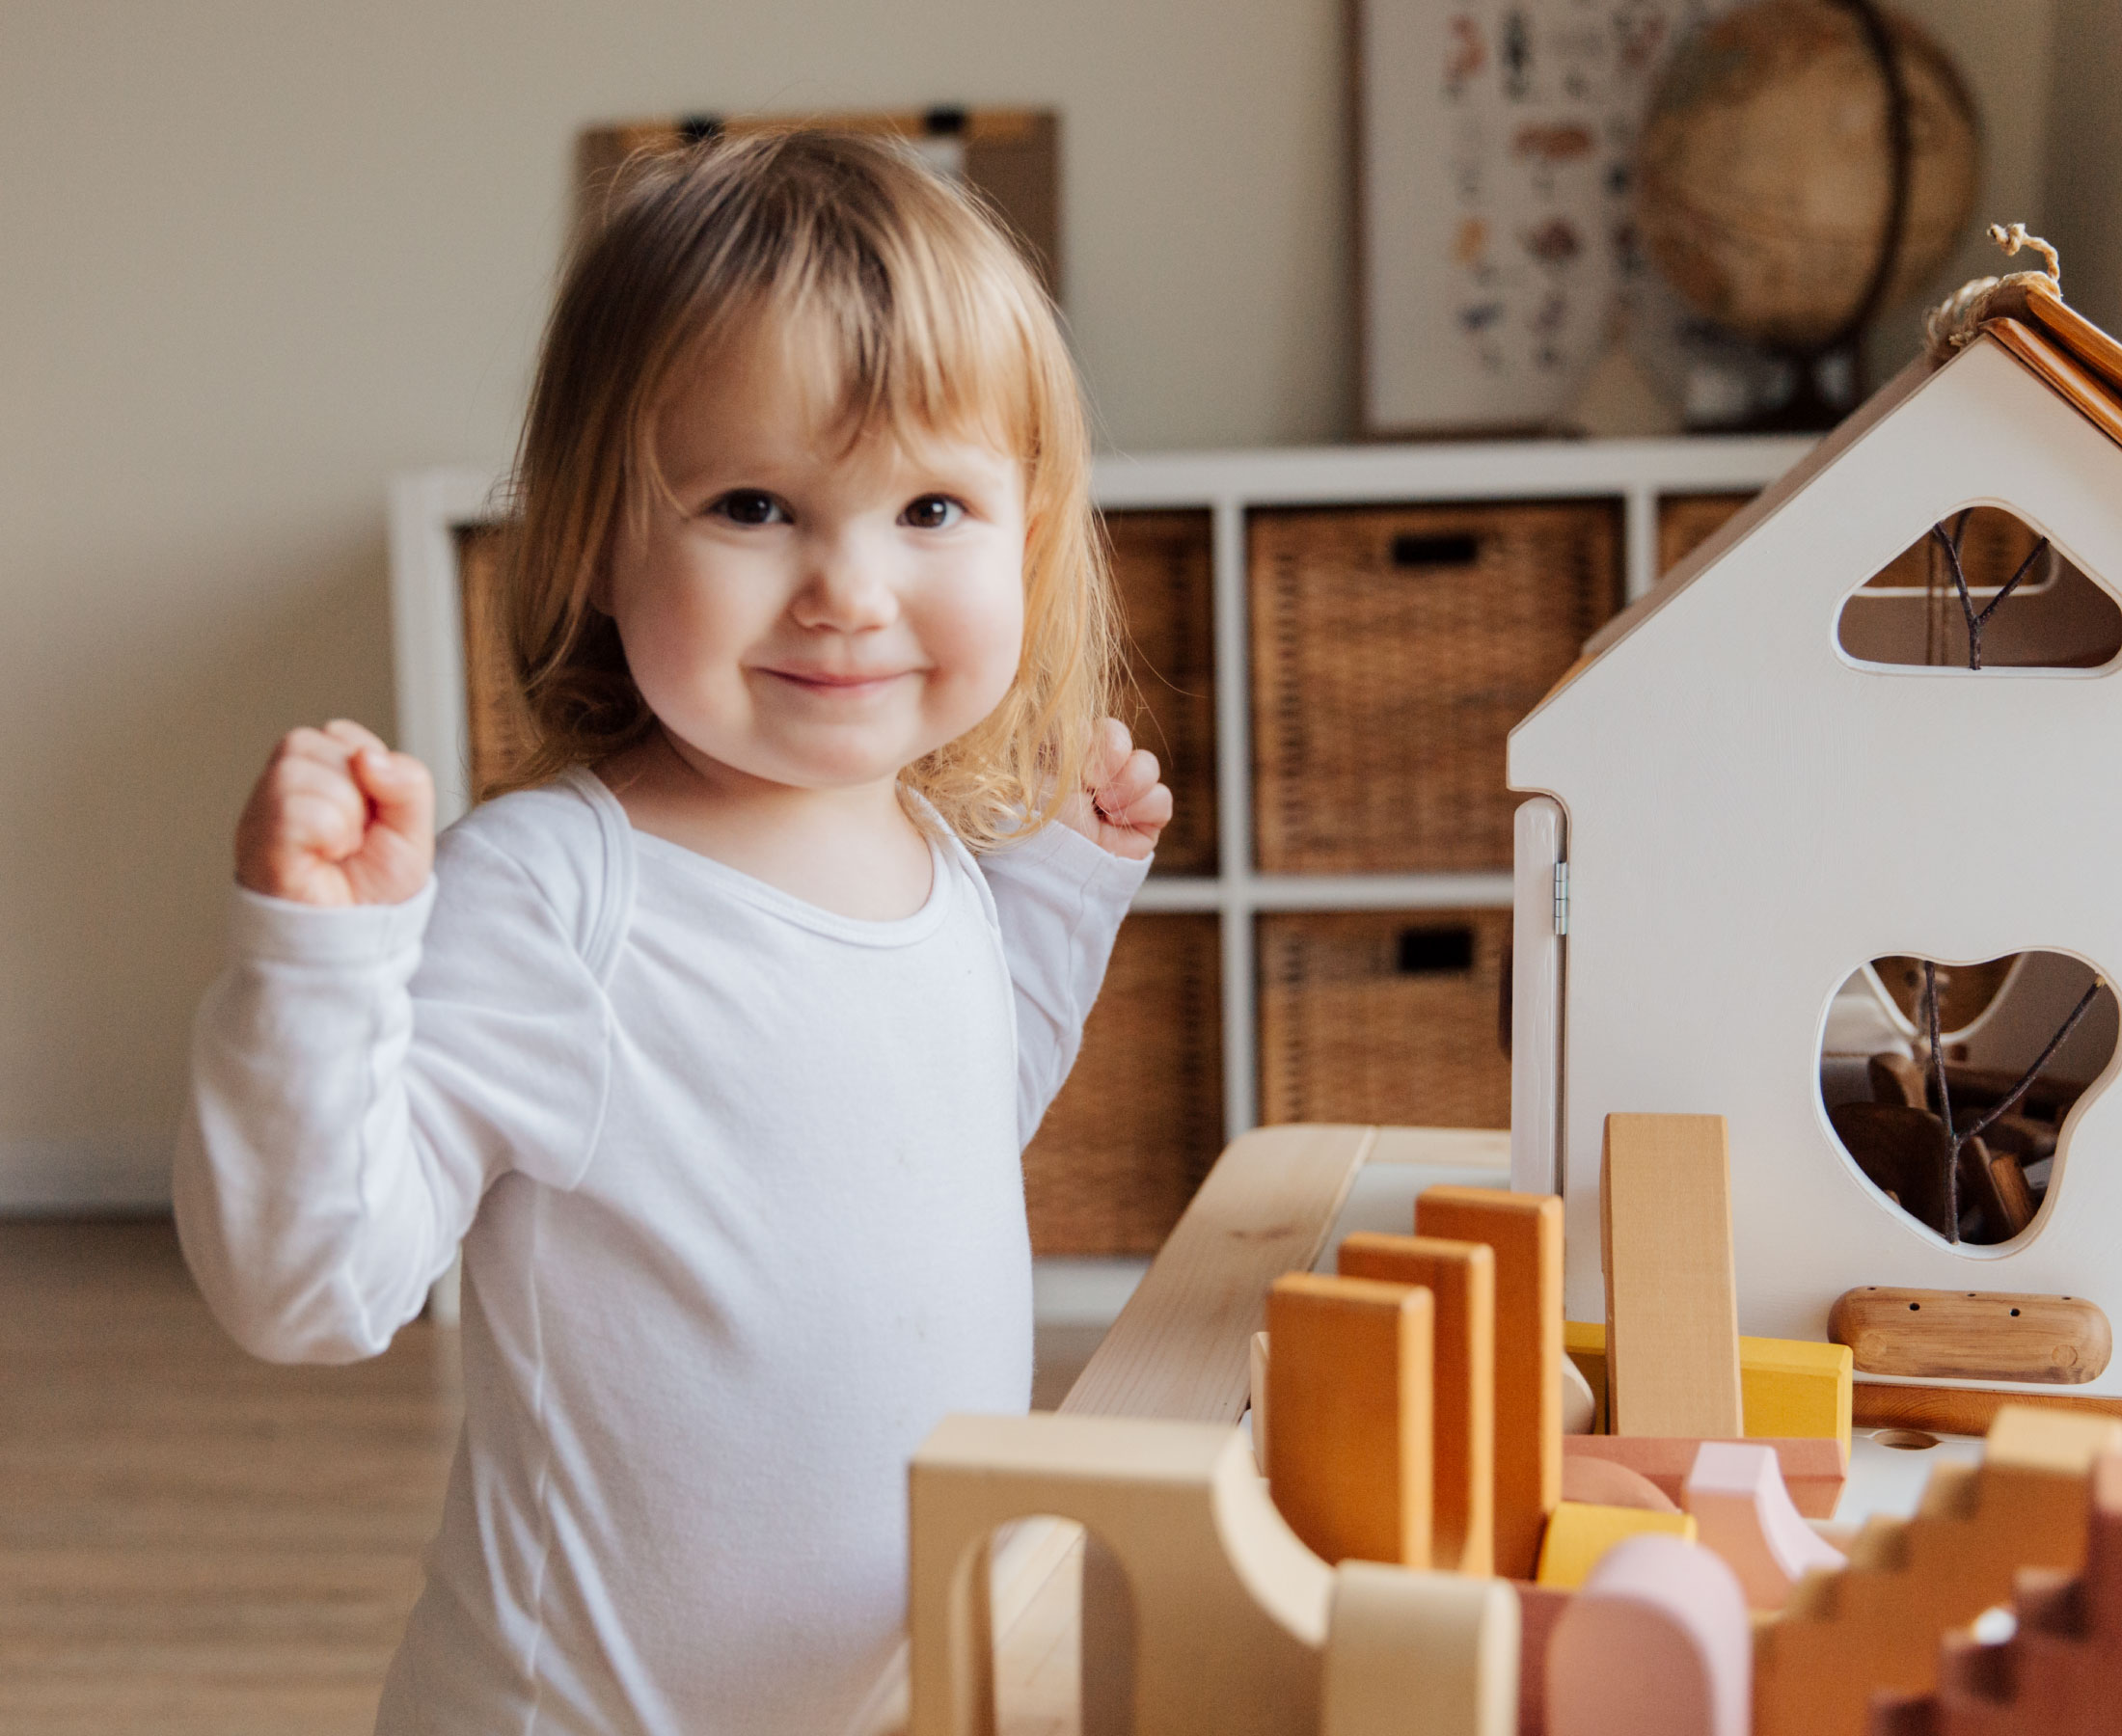 Young girl smiling next to building blocks.